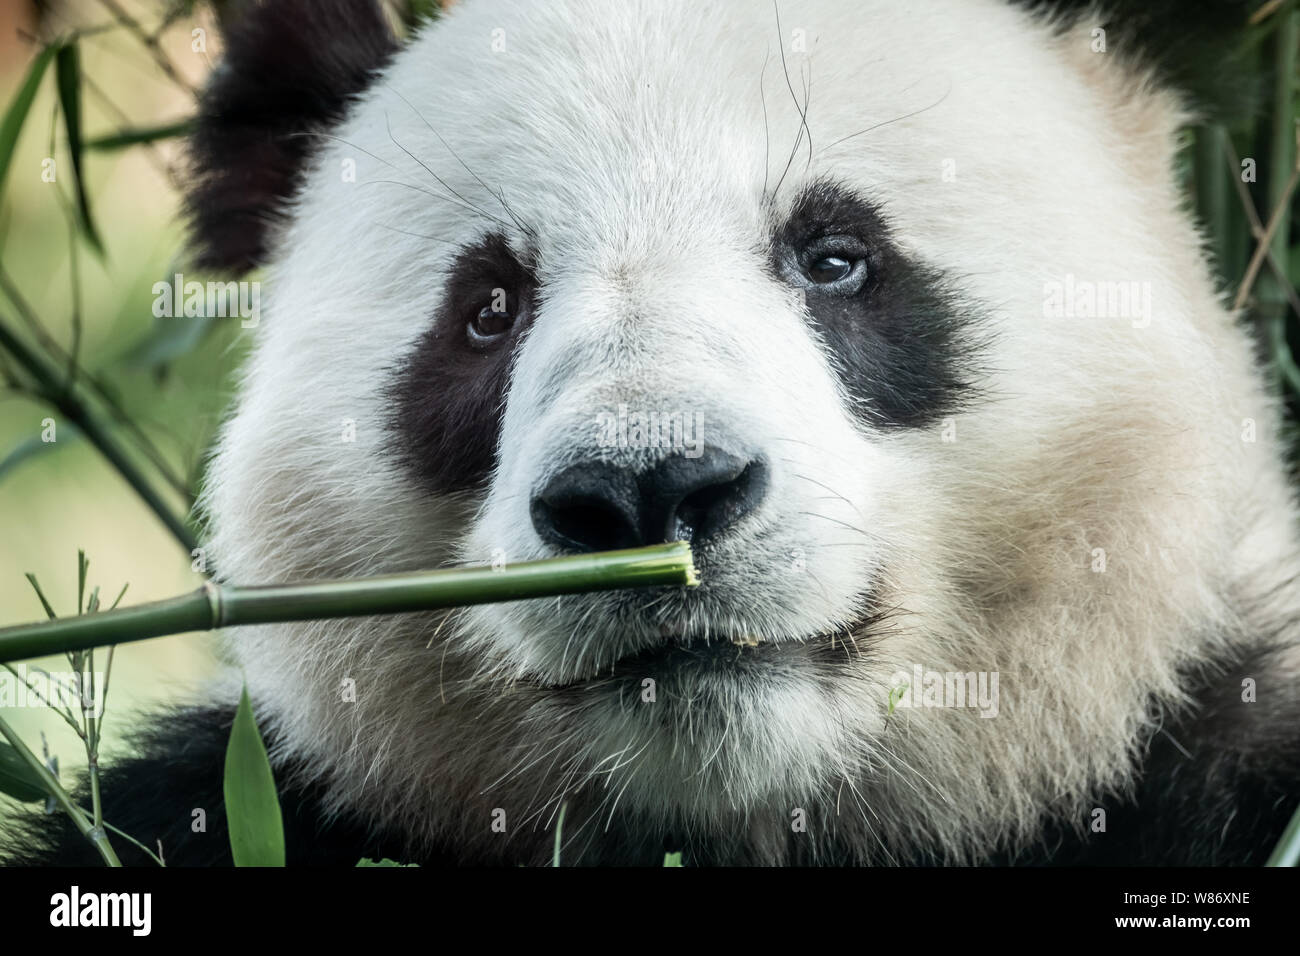 The two new pandas, Mao Sun and Xing Er (pictured) , seen in Copenhagen Zoo. (Photo credit: Gonzales Photo - Kim M. Leland). Stock Photo